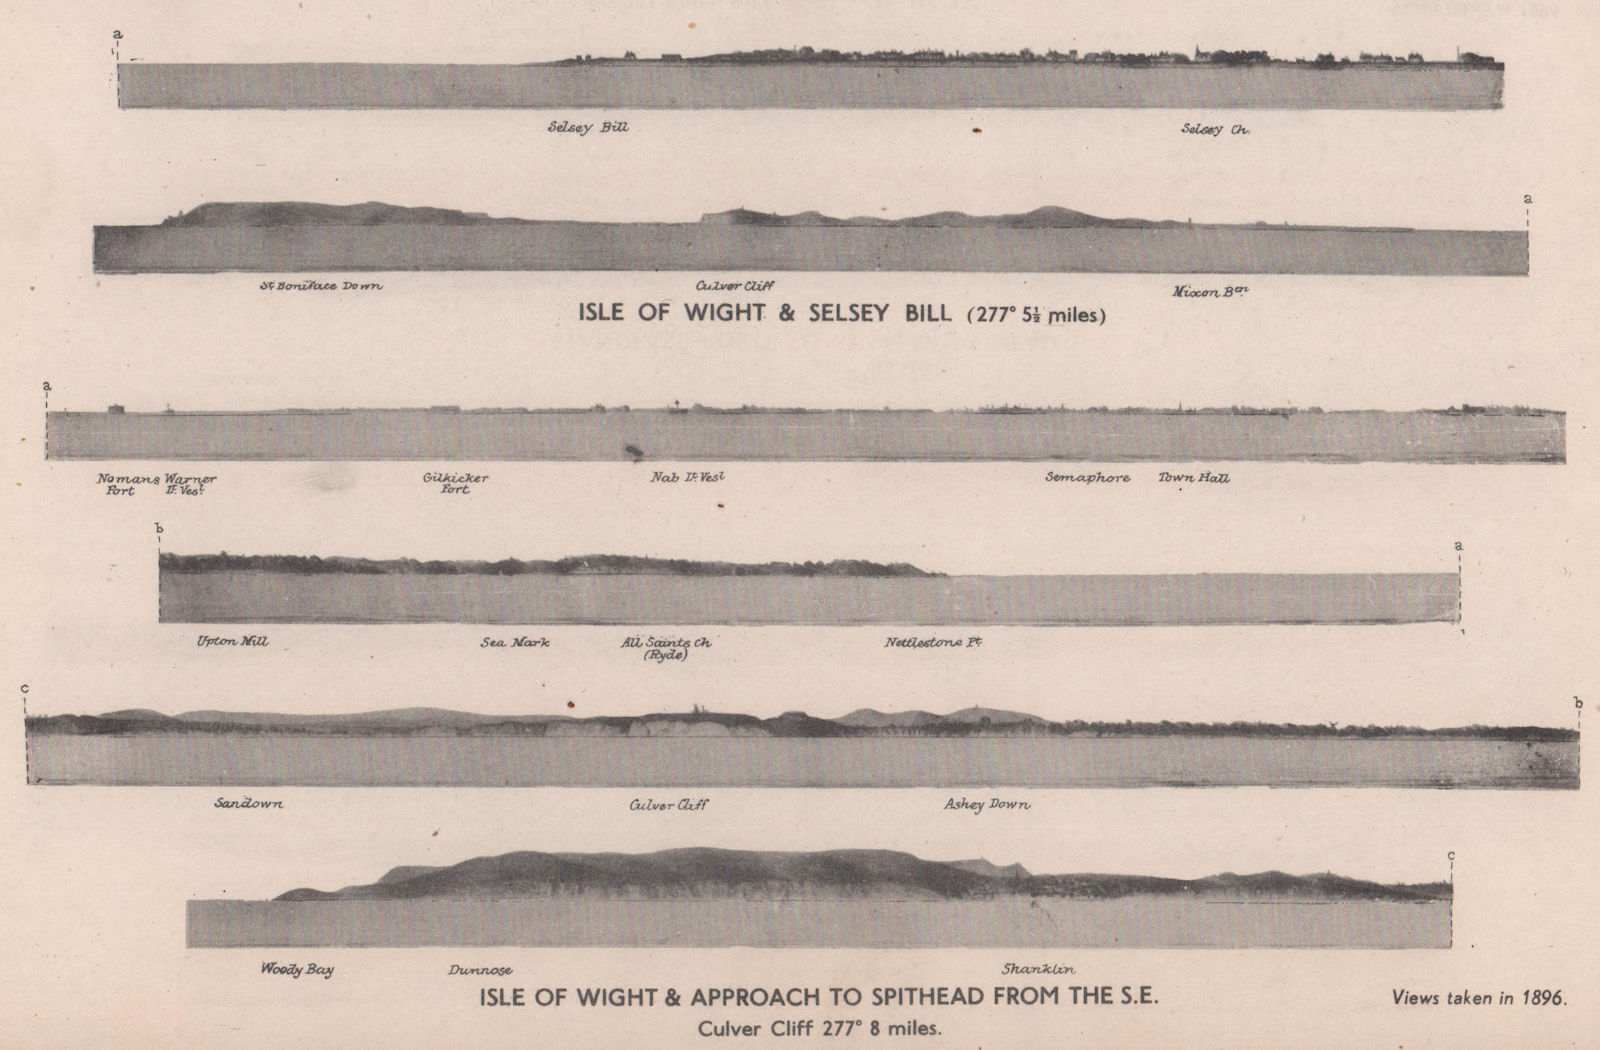 Isle of Wight Spithead approach Selsey Bill coast profile. ADMIRALTY 1943